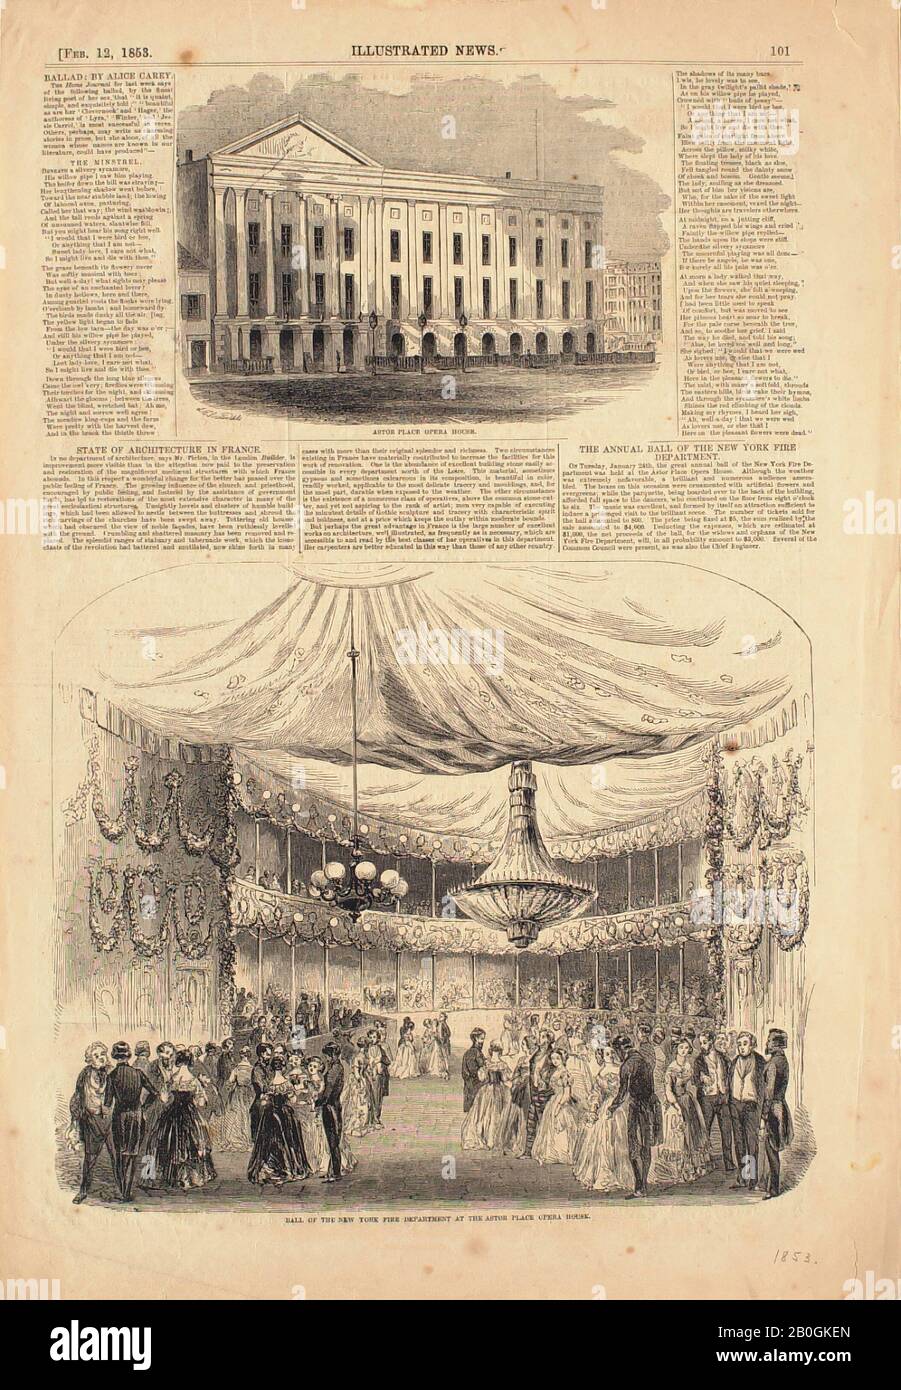 J. H.  Porter, American, 19th century, Unknown, Astor Place Opera House, and, Ball of the New York Fire Dept. at Astor Place Opera House, 1853, Wood engraving on paper, image: 4 5/8 in. (11.7 cm Stock Photo